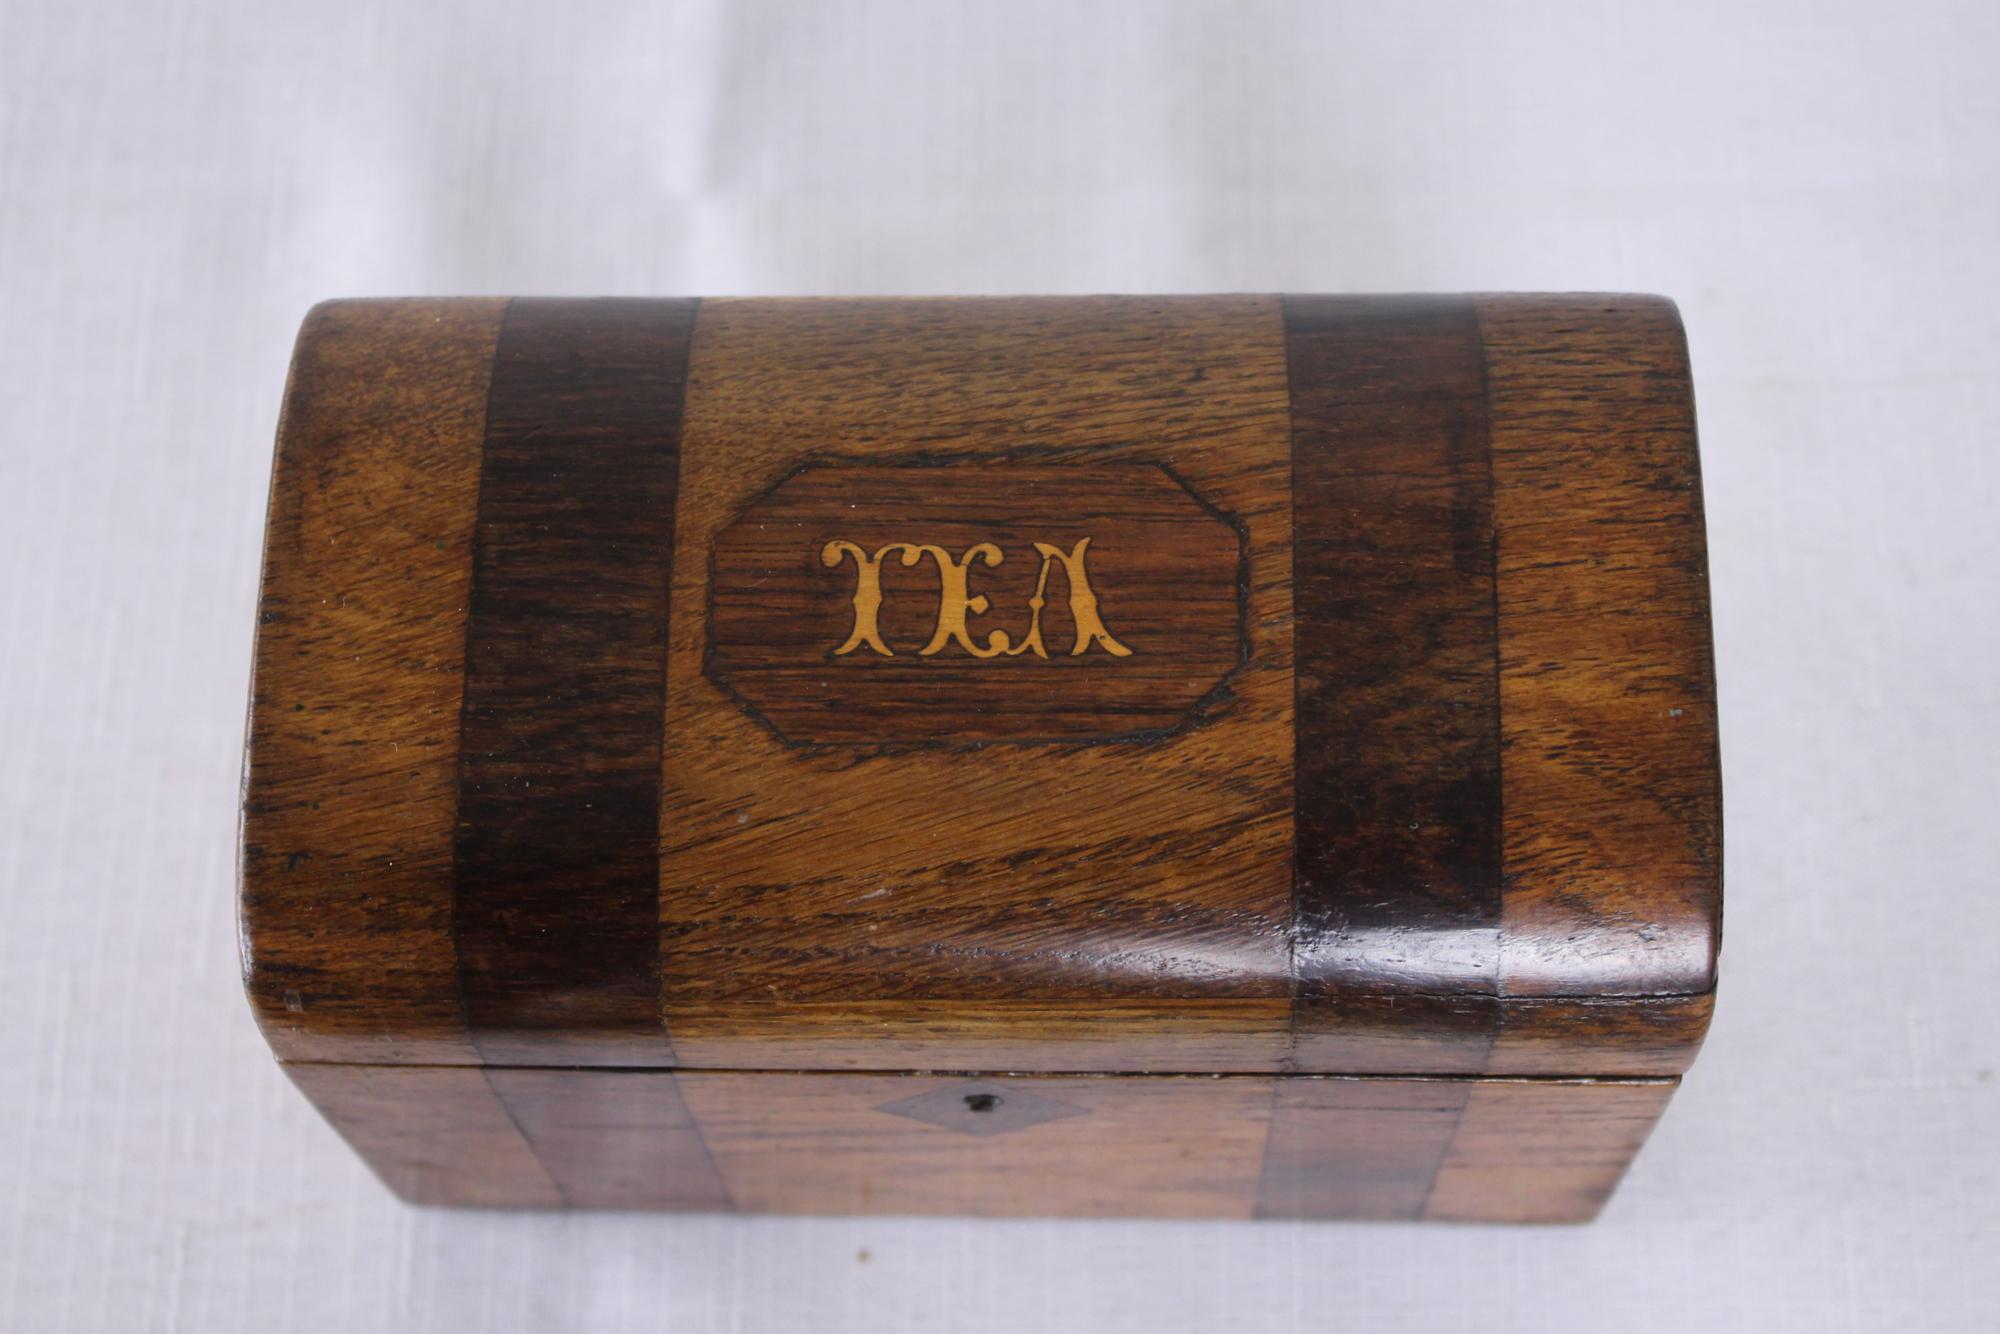 A small splendid Georgian tea caddy with TEA inlaid in satinwood. Both the oak box and the inlaid mahogany bands are in very good condition. The interior has its original compartment tops and the original interior paper. An outstanding example of